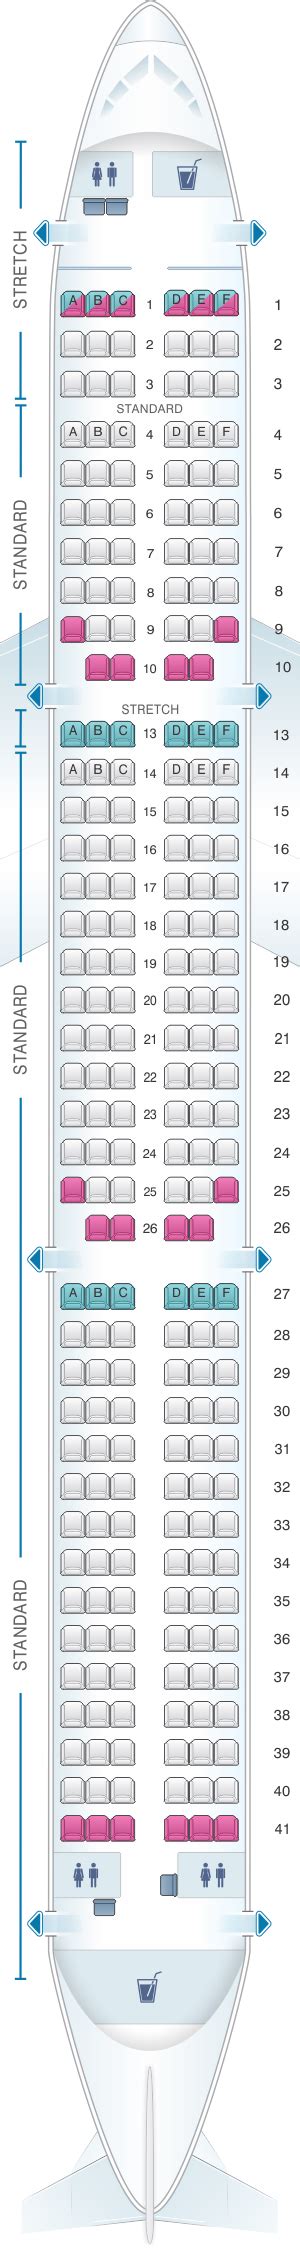 Frontier airlines plane seating chart. Standard Seating. Our standard seats are located at the back and middle of the plane and come with standard legroom and space. Note: If you do not select a seat at booking or check in, you will be randomly assigned a seat from the remaining selection. We'll try to keep your party together, but the only way to ensure that you'll sit together is ... 